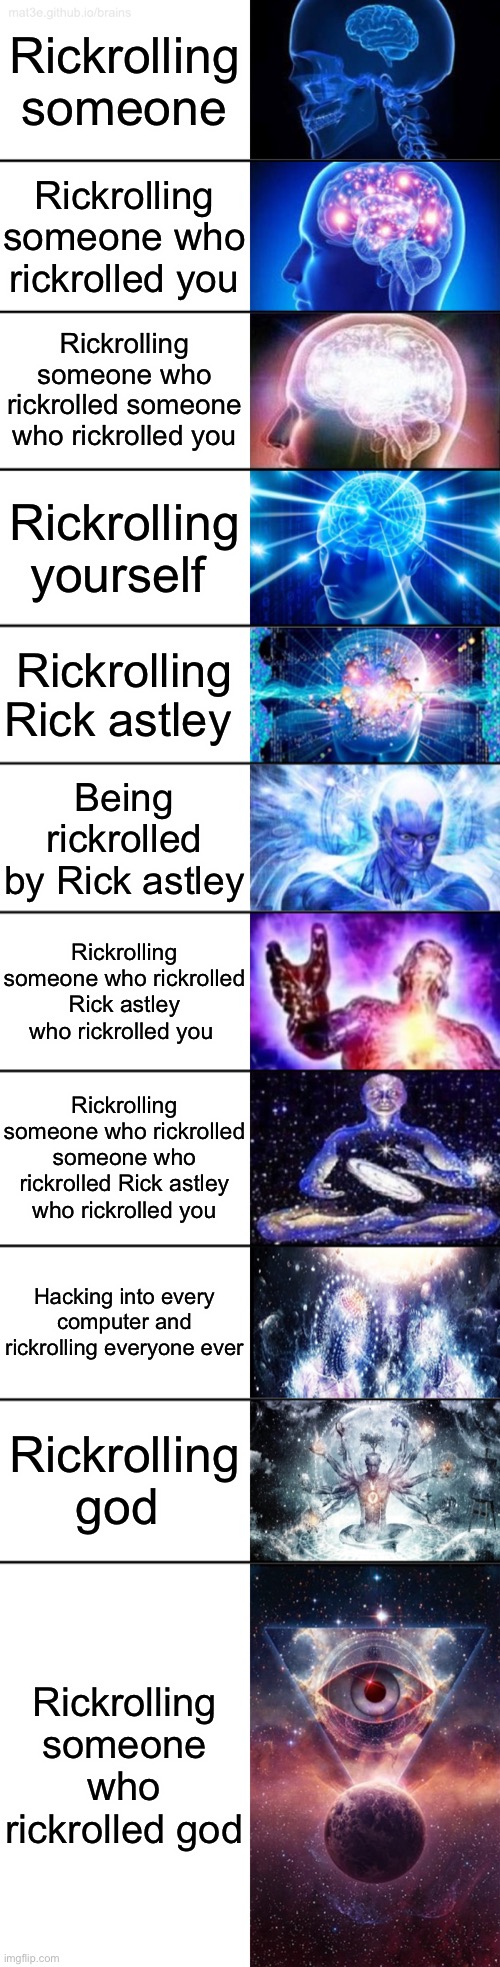 11-Tier Expanding Brain | Rickrolling someone; Rickrolling someone who rickrolled you; Rickrolling someone who rickrolled someone who rickrolled you; Rickrolling yourself; Rickrolling Rick astley; Being rickrolled by Rick astley; Rickrolling someone who rickrolled Rick astley who rickrolled you; Rickrolling someone who rickrolled someone who rickrolled Rick astley who rickrolled you; Hacking into every computer and rickrolling everyone ever; Rickrolling god; Rickrolling someone who rickrolled god | image tagged in 11-tier expanding brain | made w/ Imgflip meme maker